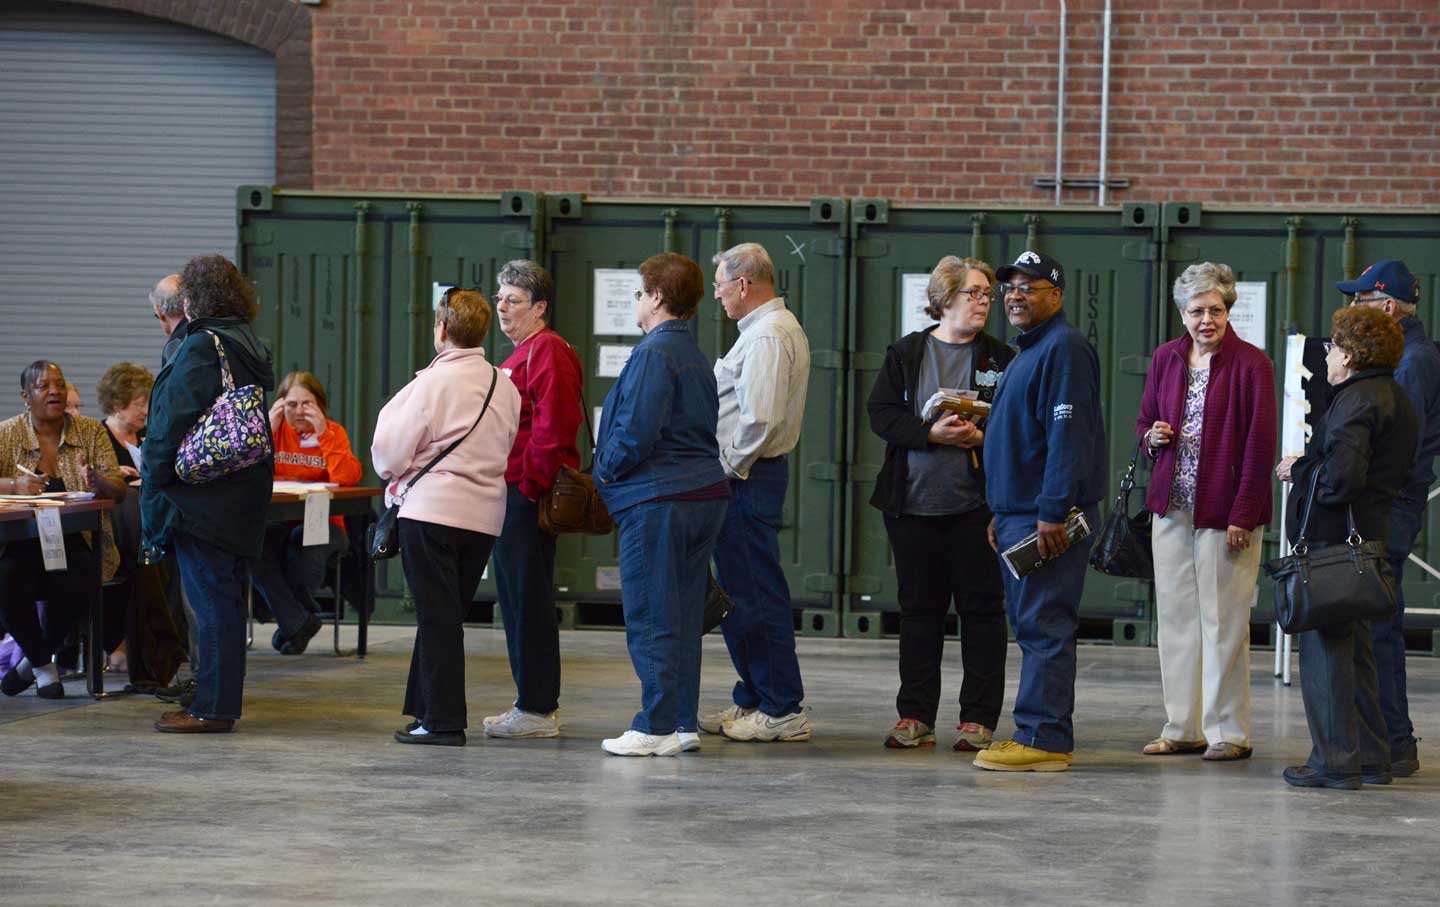 New York Had the Second-Lowest Voter Turnout So Far This Election Season